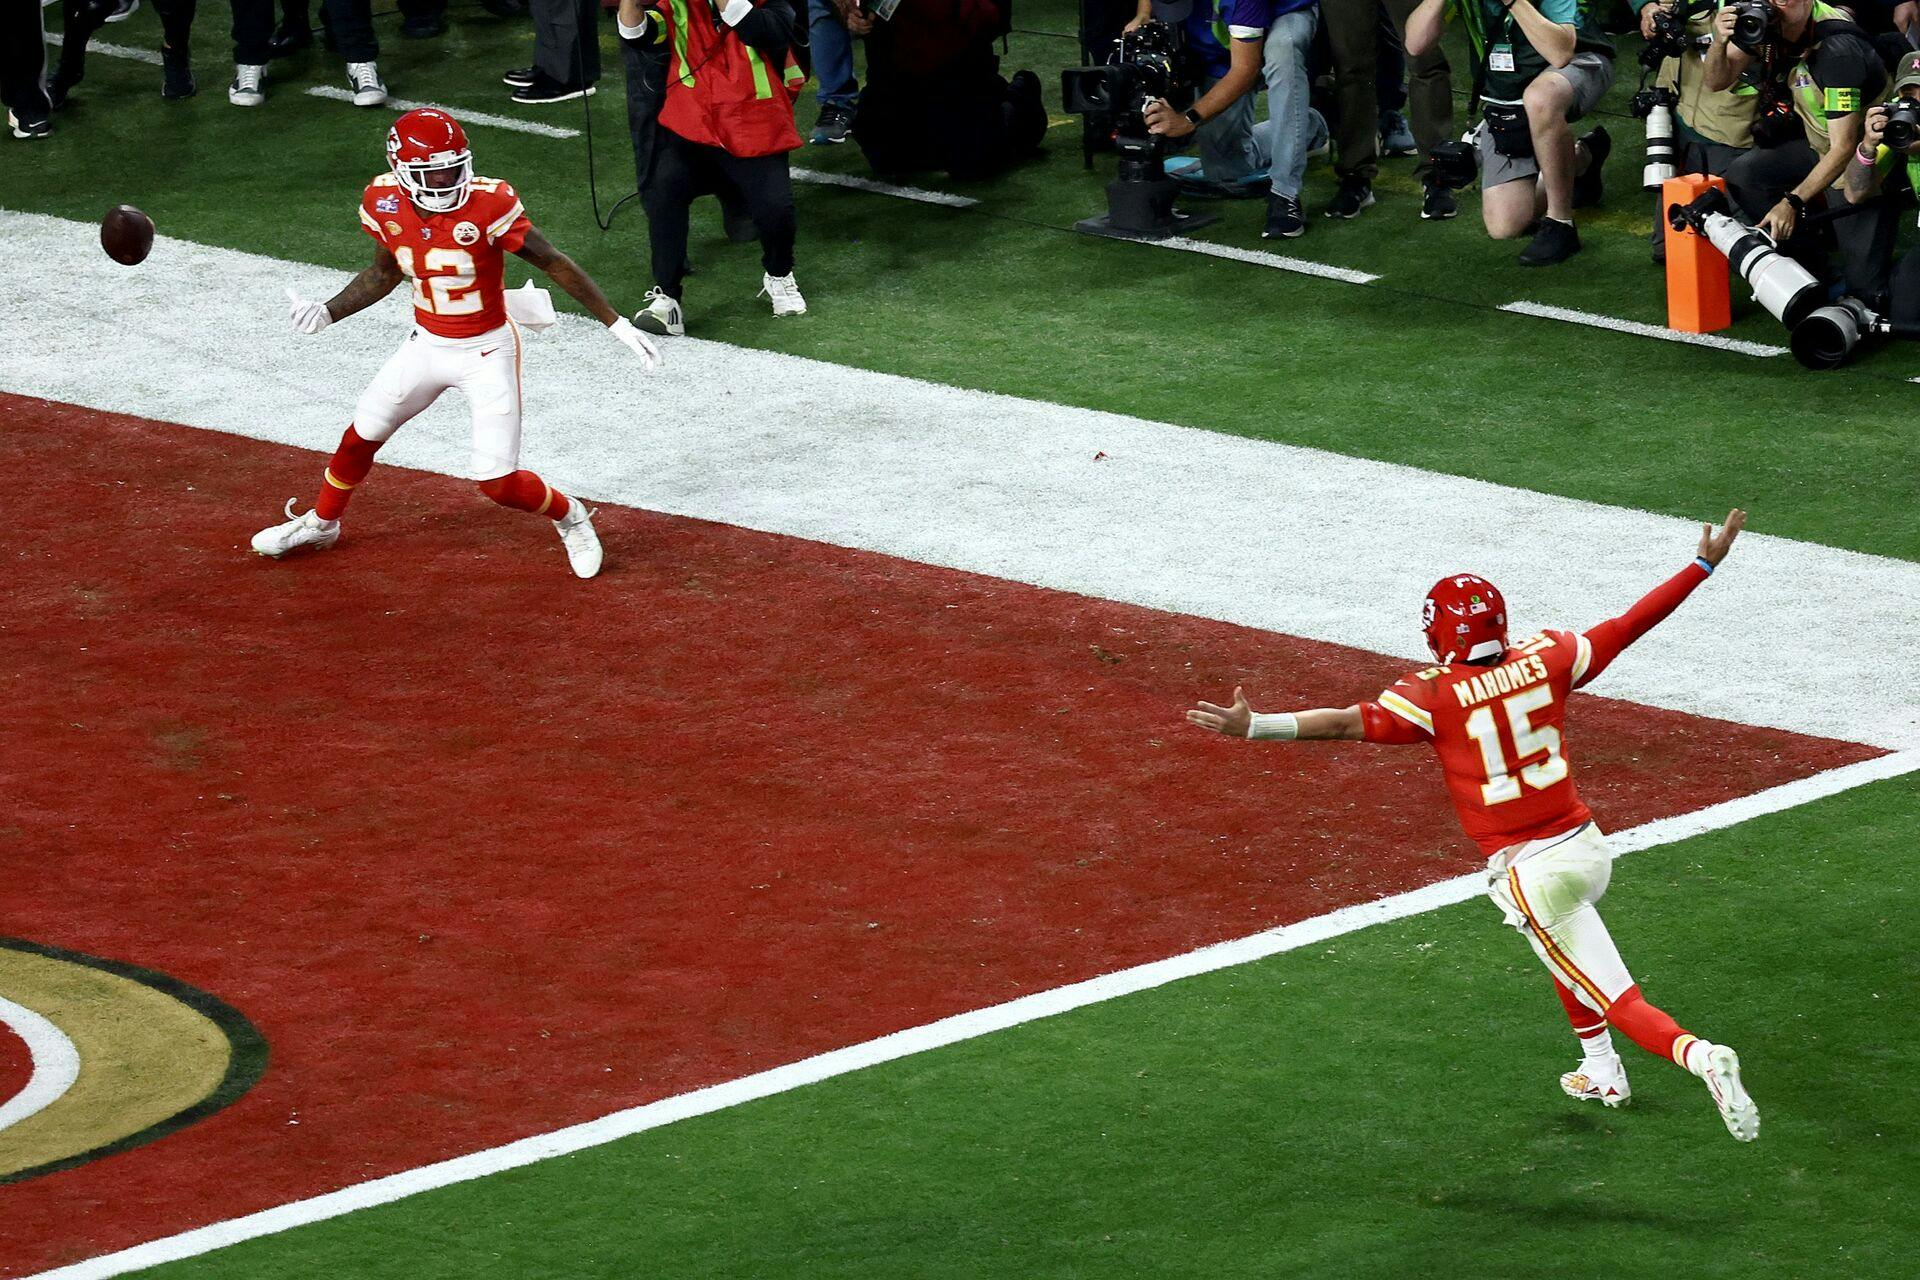 LAS VEGAS, NEVADA - FEBRUARY 11: Mecole Hardman Jr. #12 of the Kansas City Chiefs celebrates with Patrick Mahomes #15 after scoring the game-winning touchdown in overtime to defeat the San Francisco 49ers 25-22 during Super Bowl LVIII at Allegiant Stadium on February 11, 2024 in Las Vegas, Nevada. Tim Nwachukwu/Getty Images/AFP (Photo by Tim Nwachukwu / GETTY IMAGES NORTH AMERICA / Getty Images via AFP)